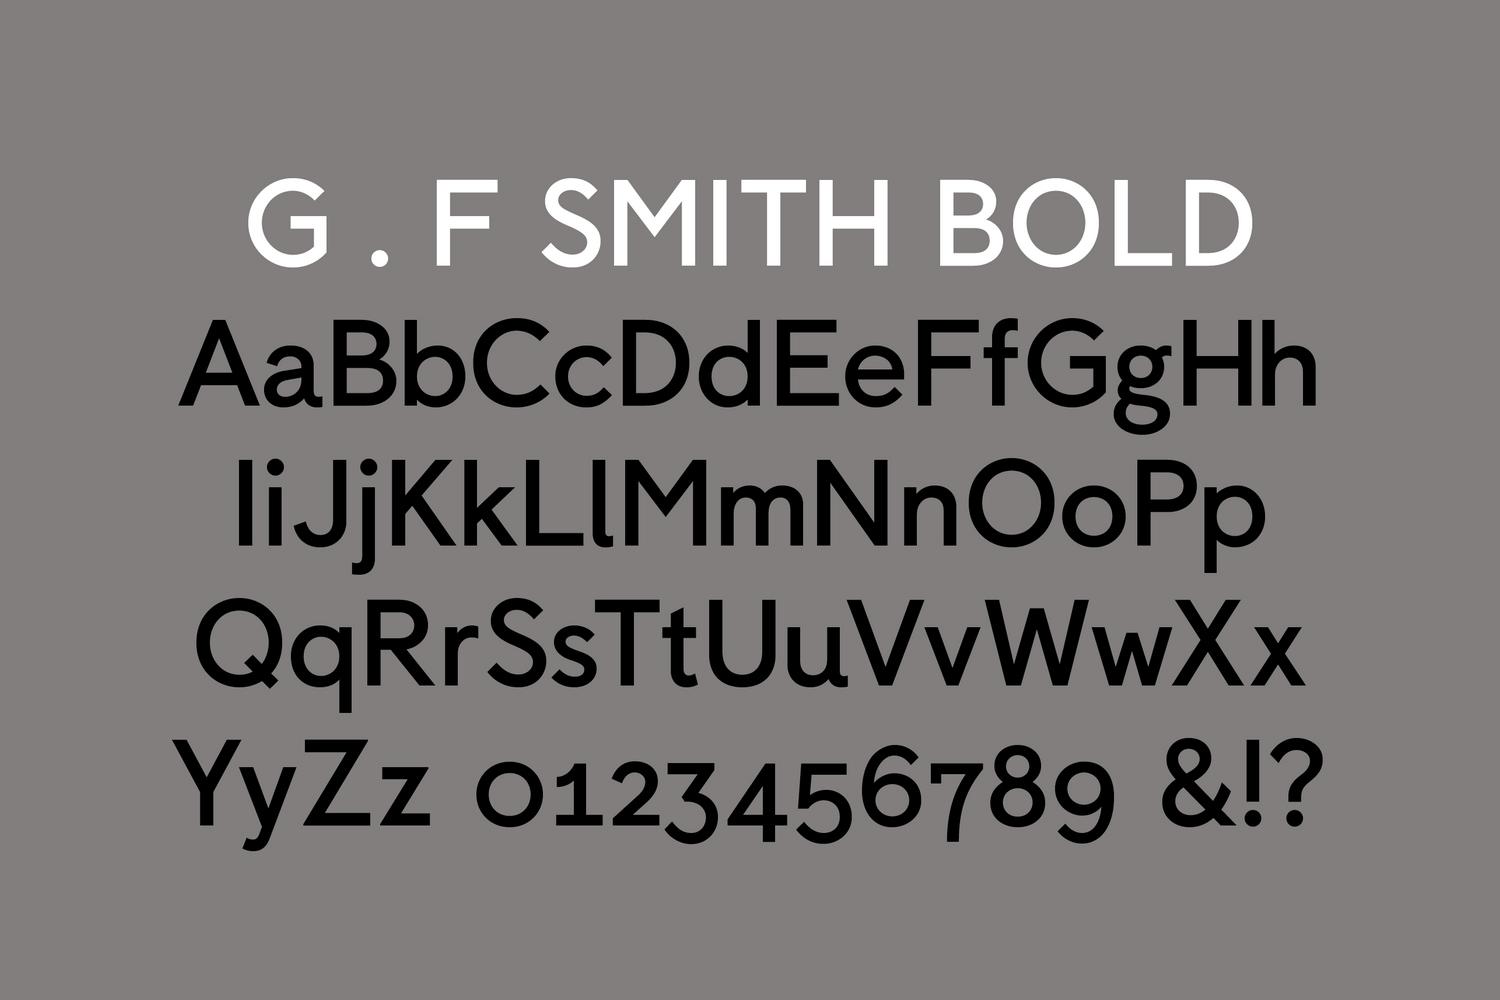 Custom Typeface Design – G . F Smith by Colophon Foundry, United Kingdom